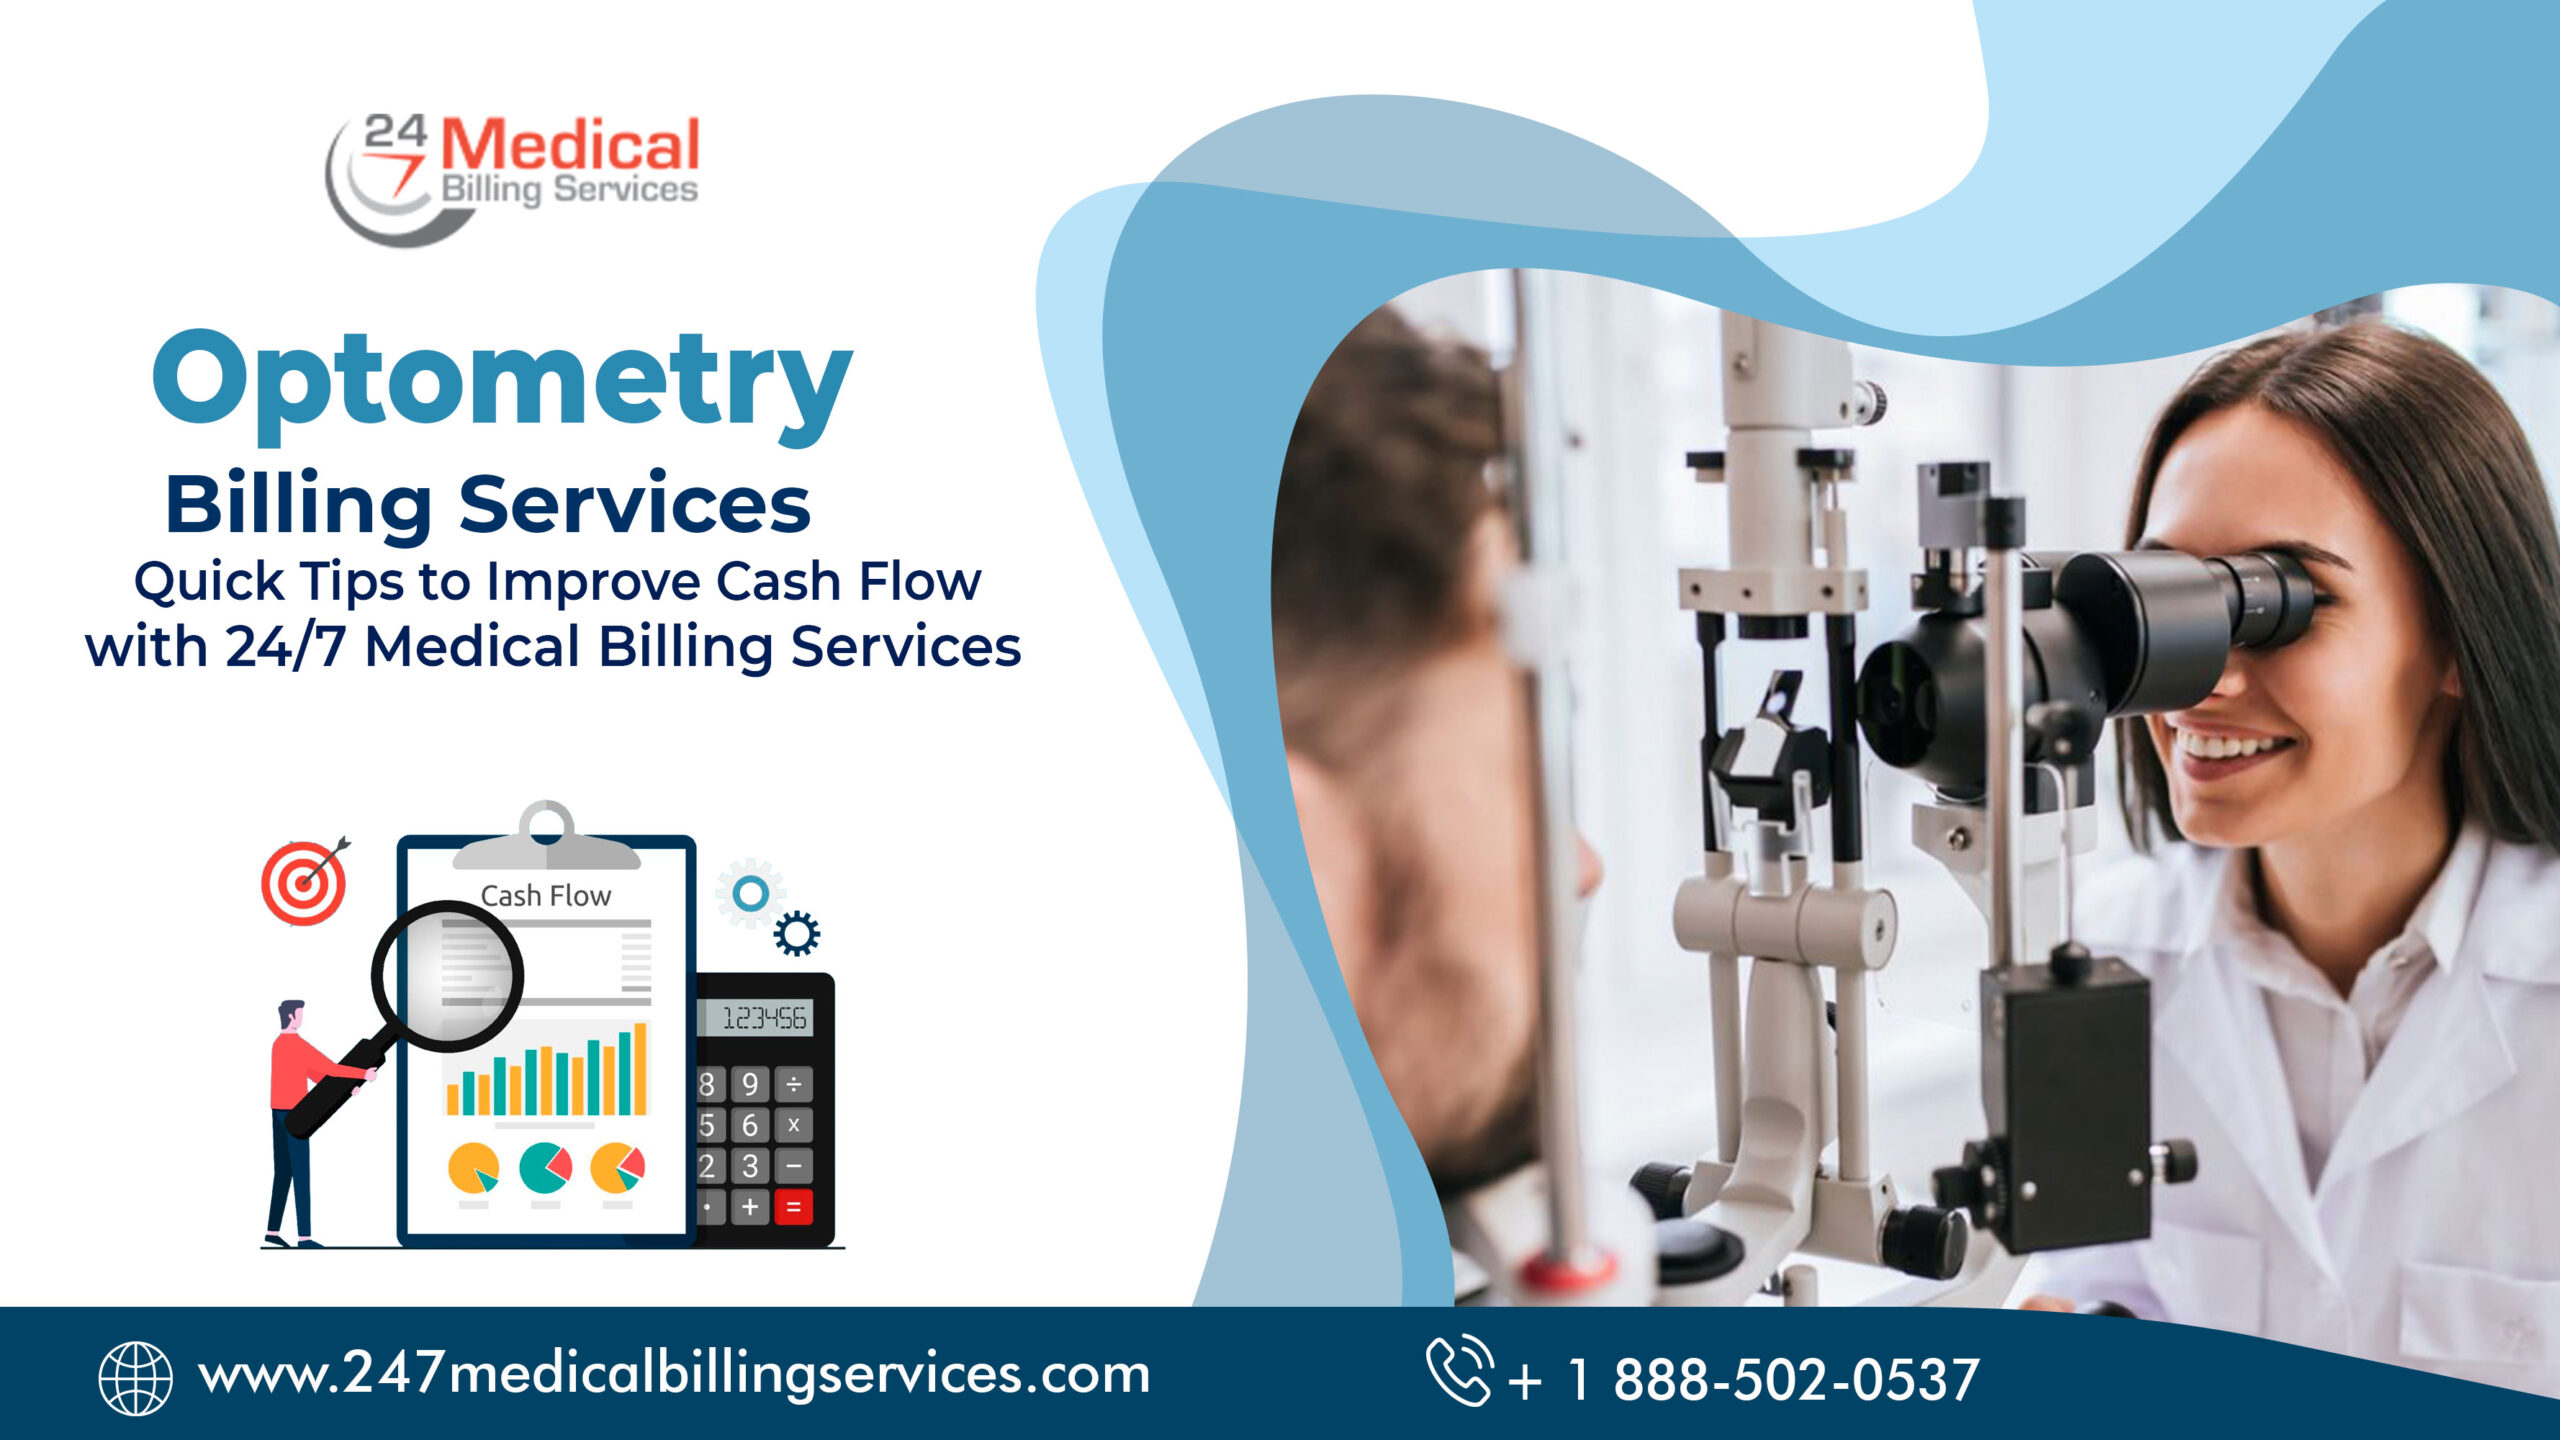  Optometry Billing Services – Quick Tips to Improve Cash Flow with 24/7 Medical Billing Services